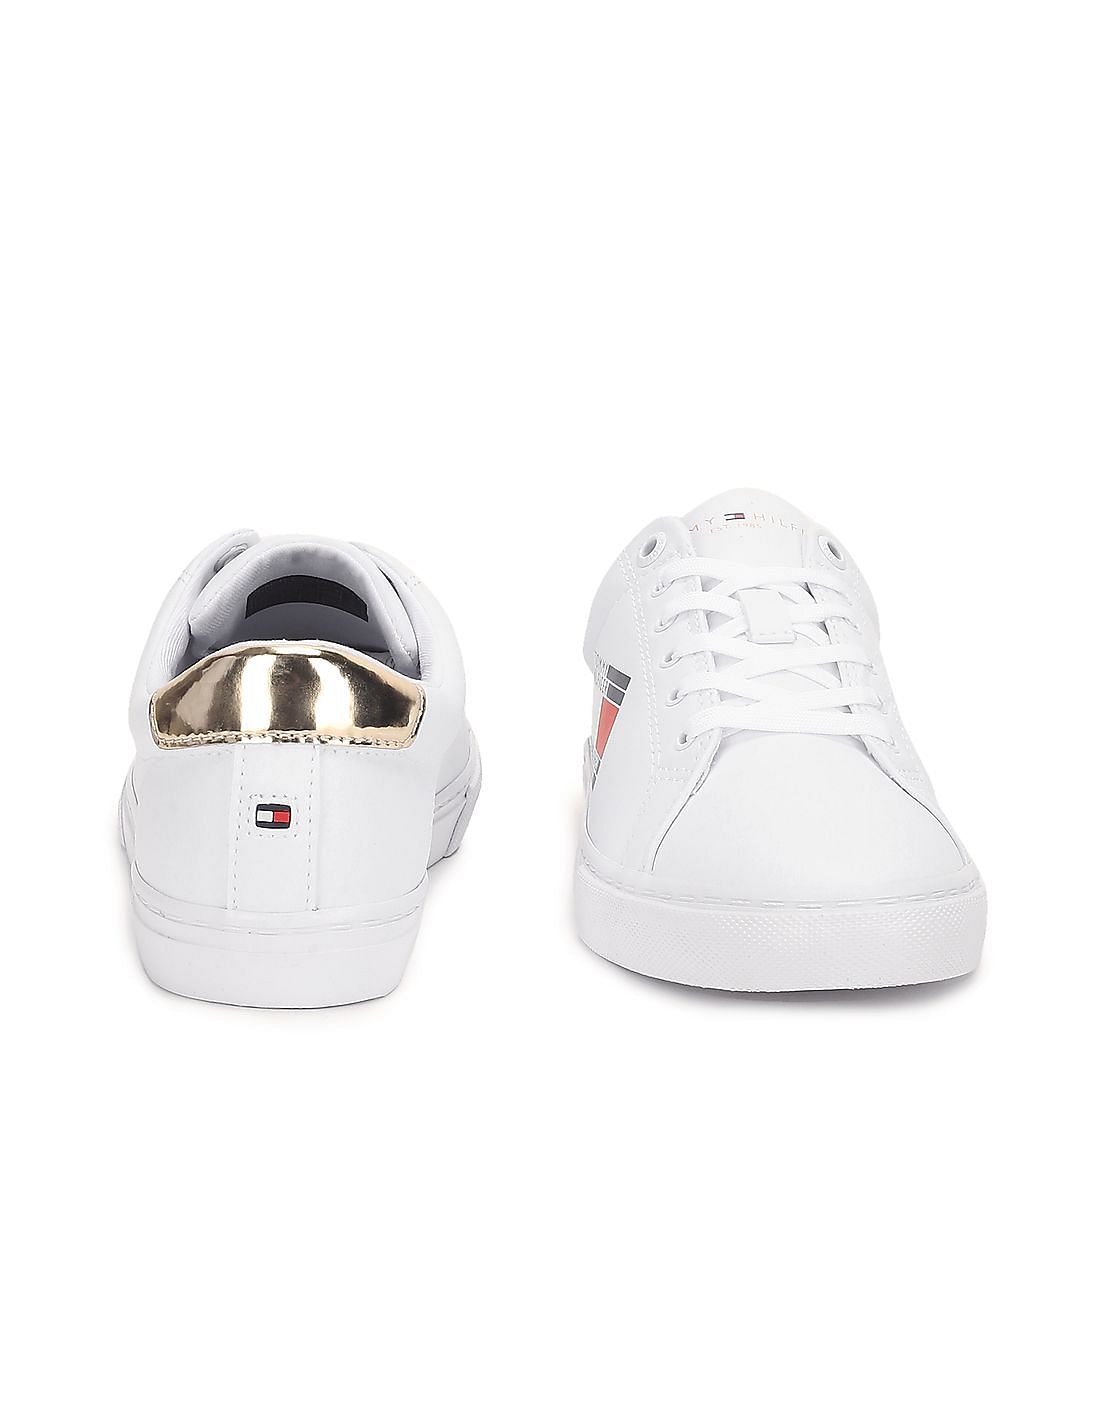 Lace Hilfiger Tommy Brand Up Sneakers Women Flag Buy White